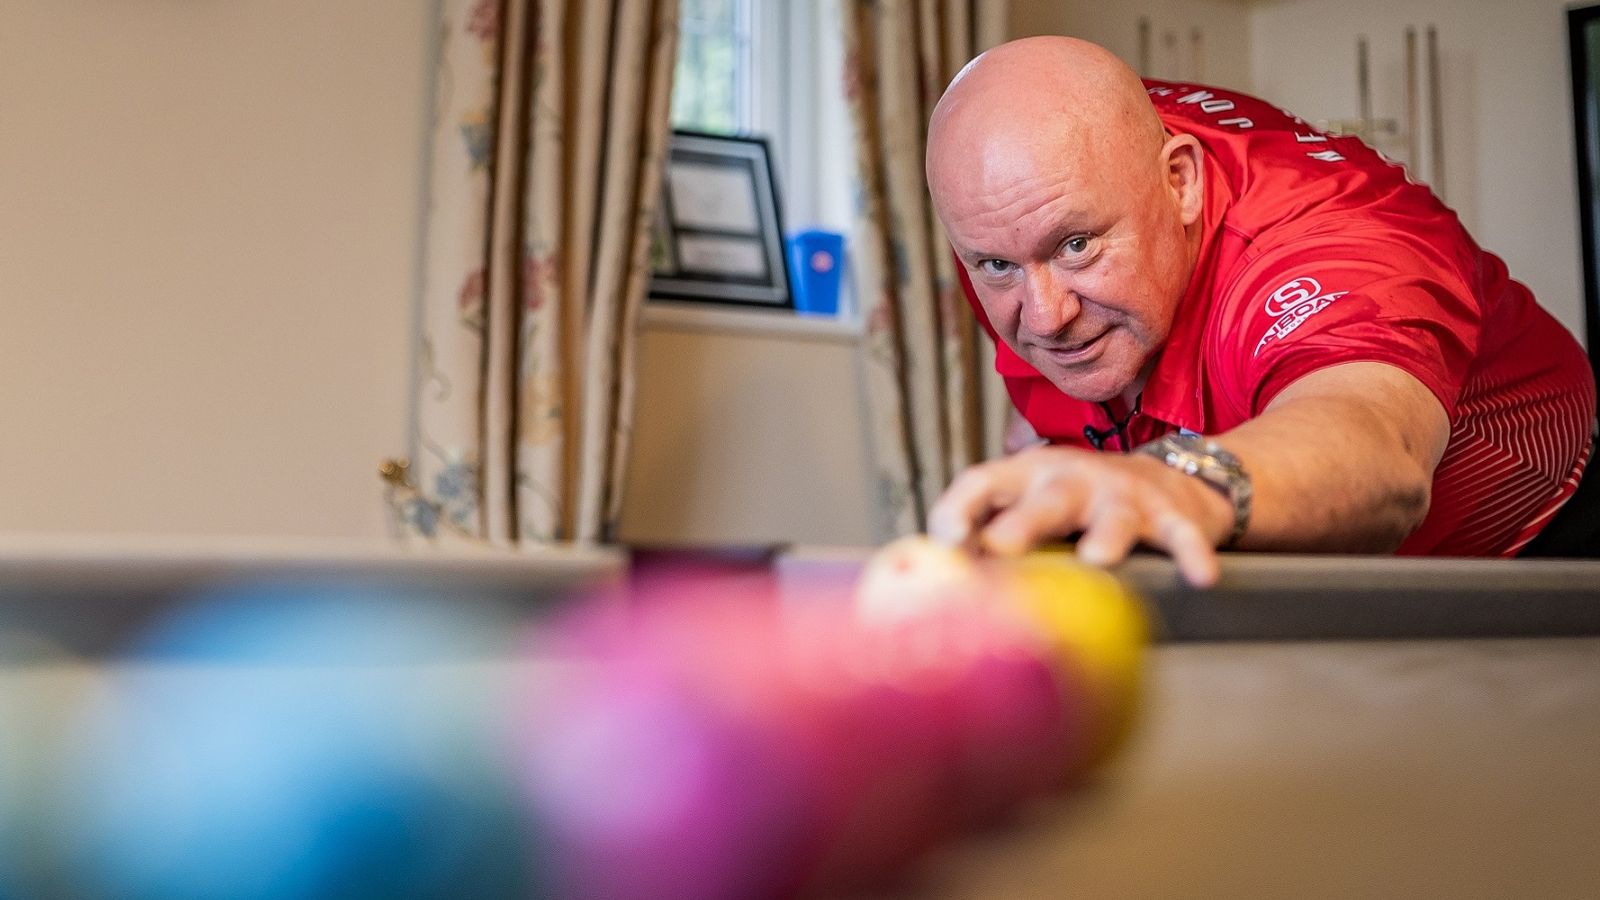 Lottery winner who bought pool table with prize money gets England call-up